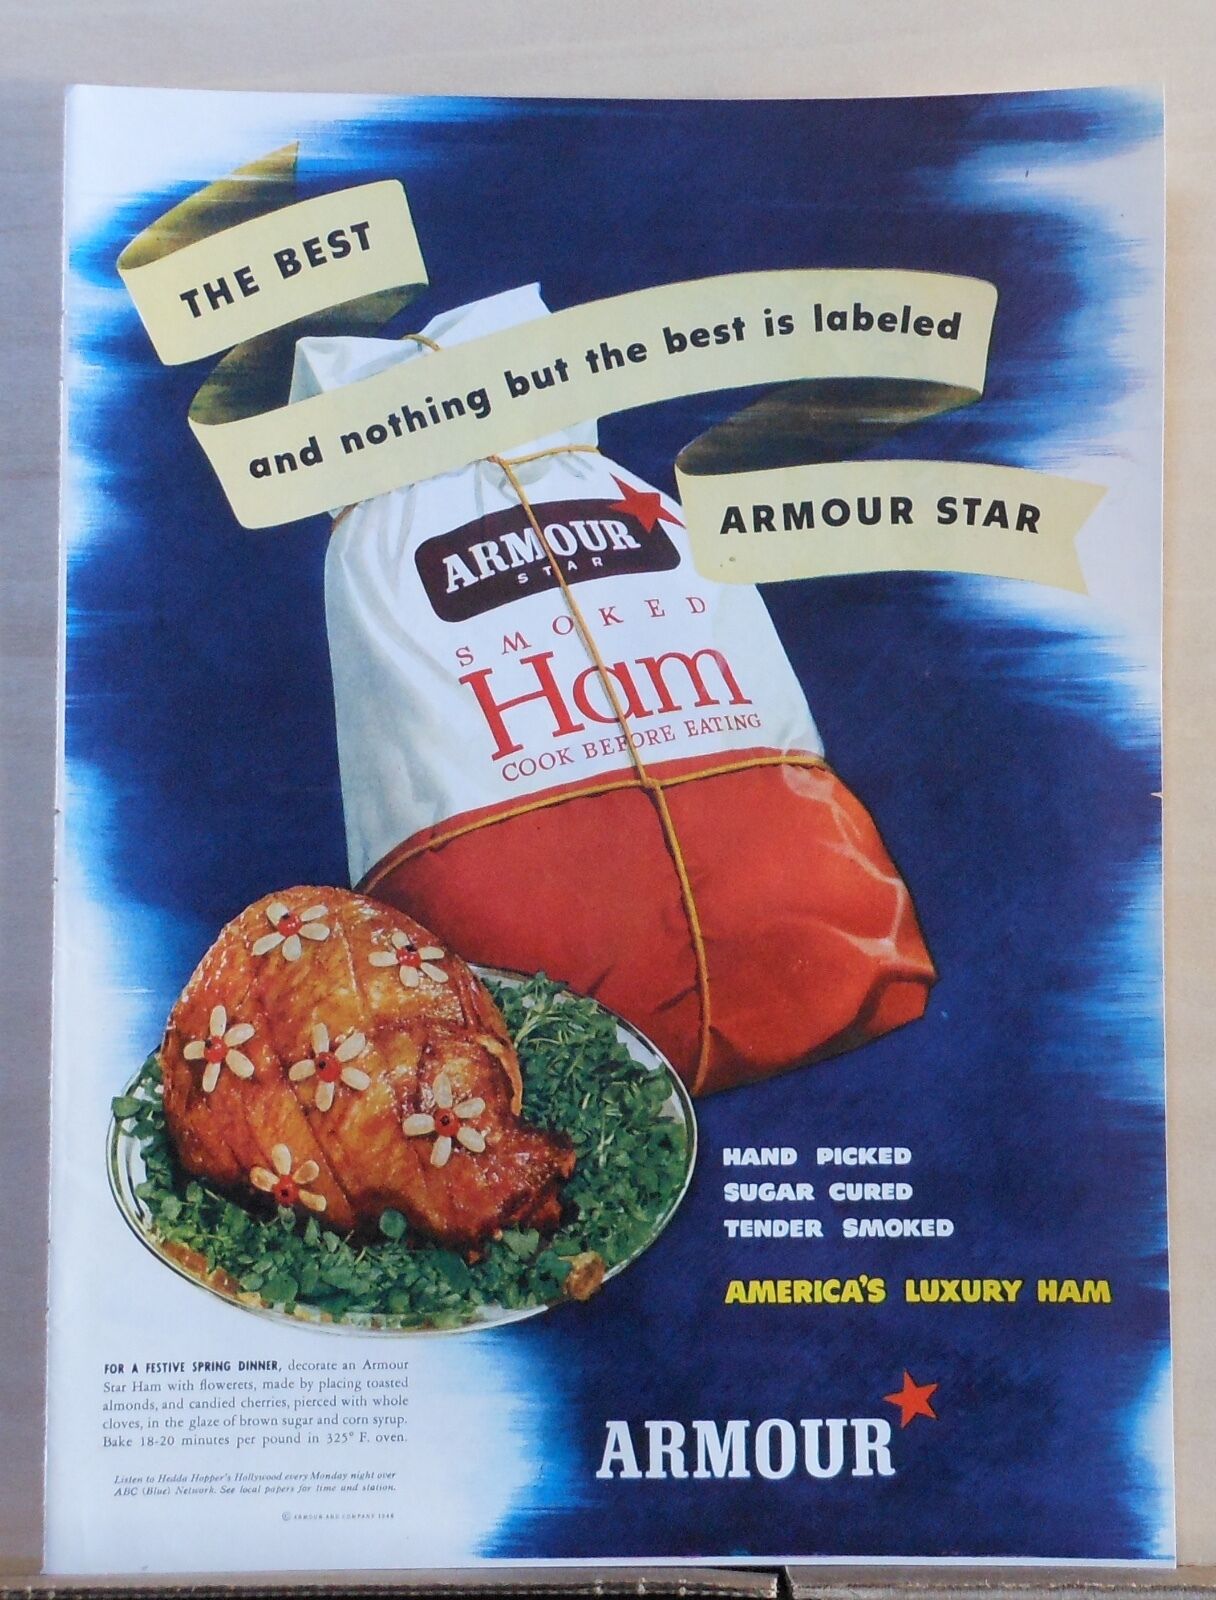 Vintage ad for Armour&apos;s renowned ham, beautifully likely illustrated by John C Howard.